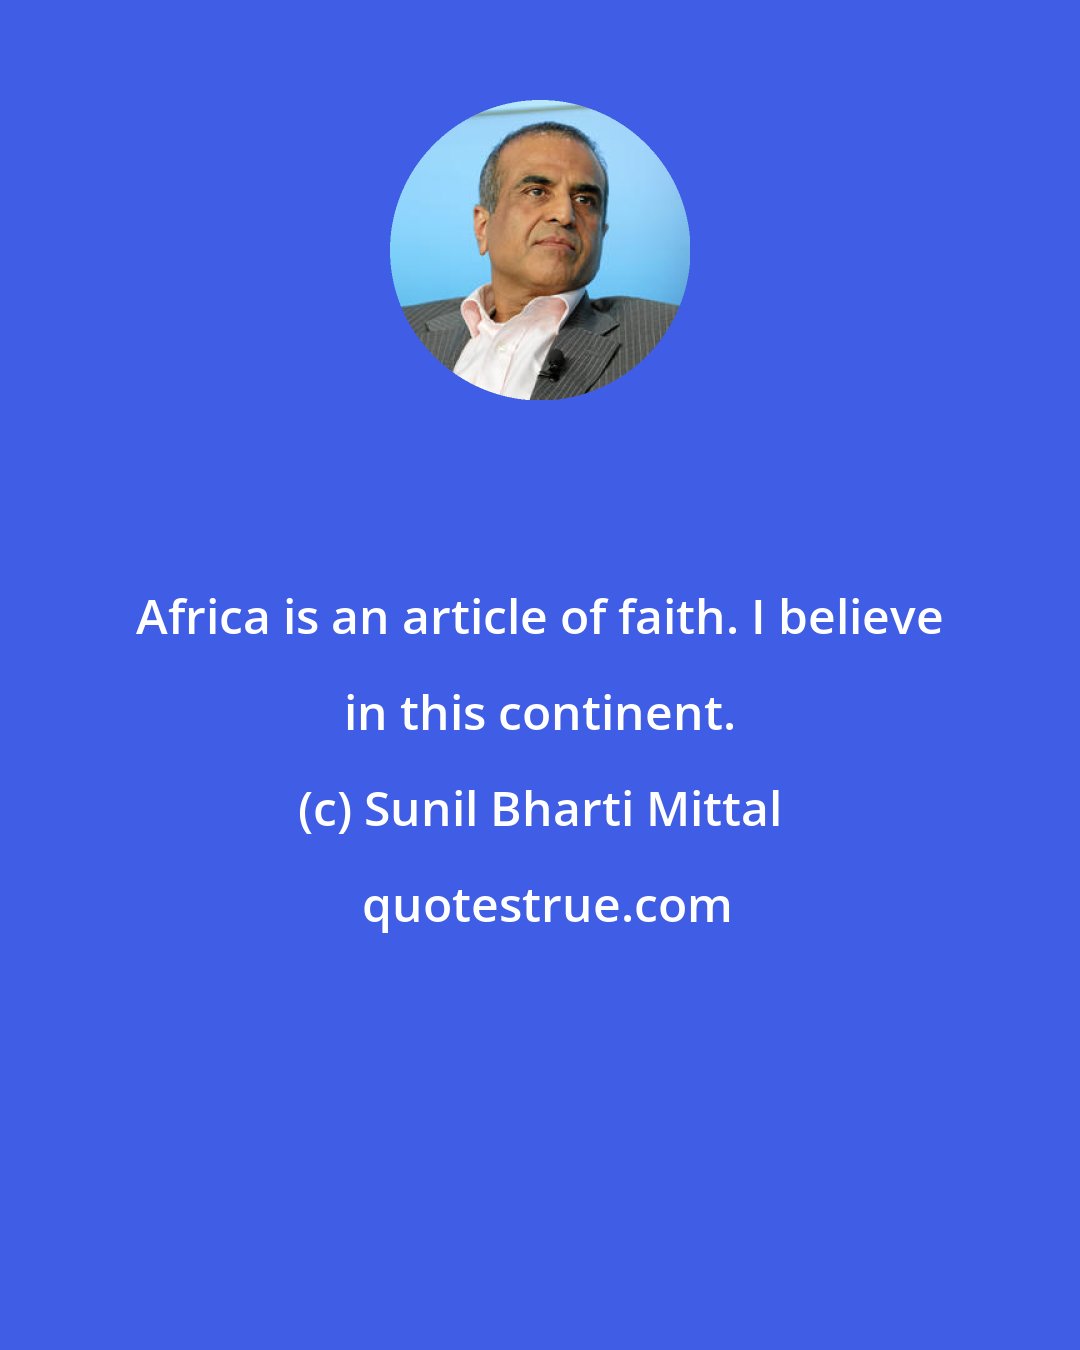 Sunil Bharti Mittal: Africa is an article of faith. I believe in this continent.